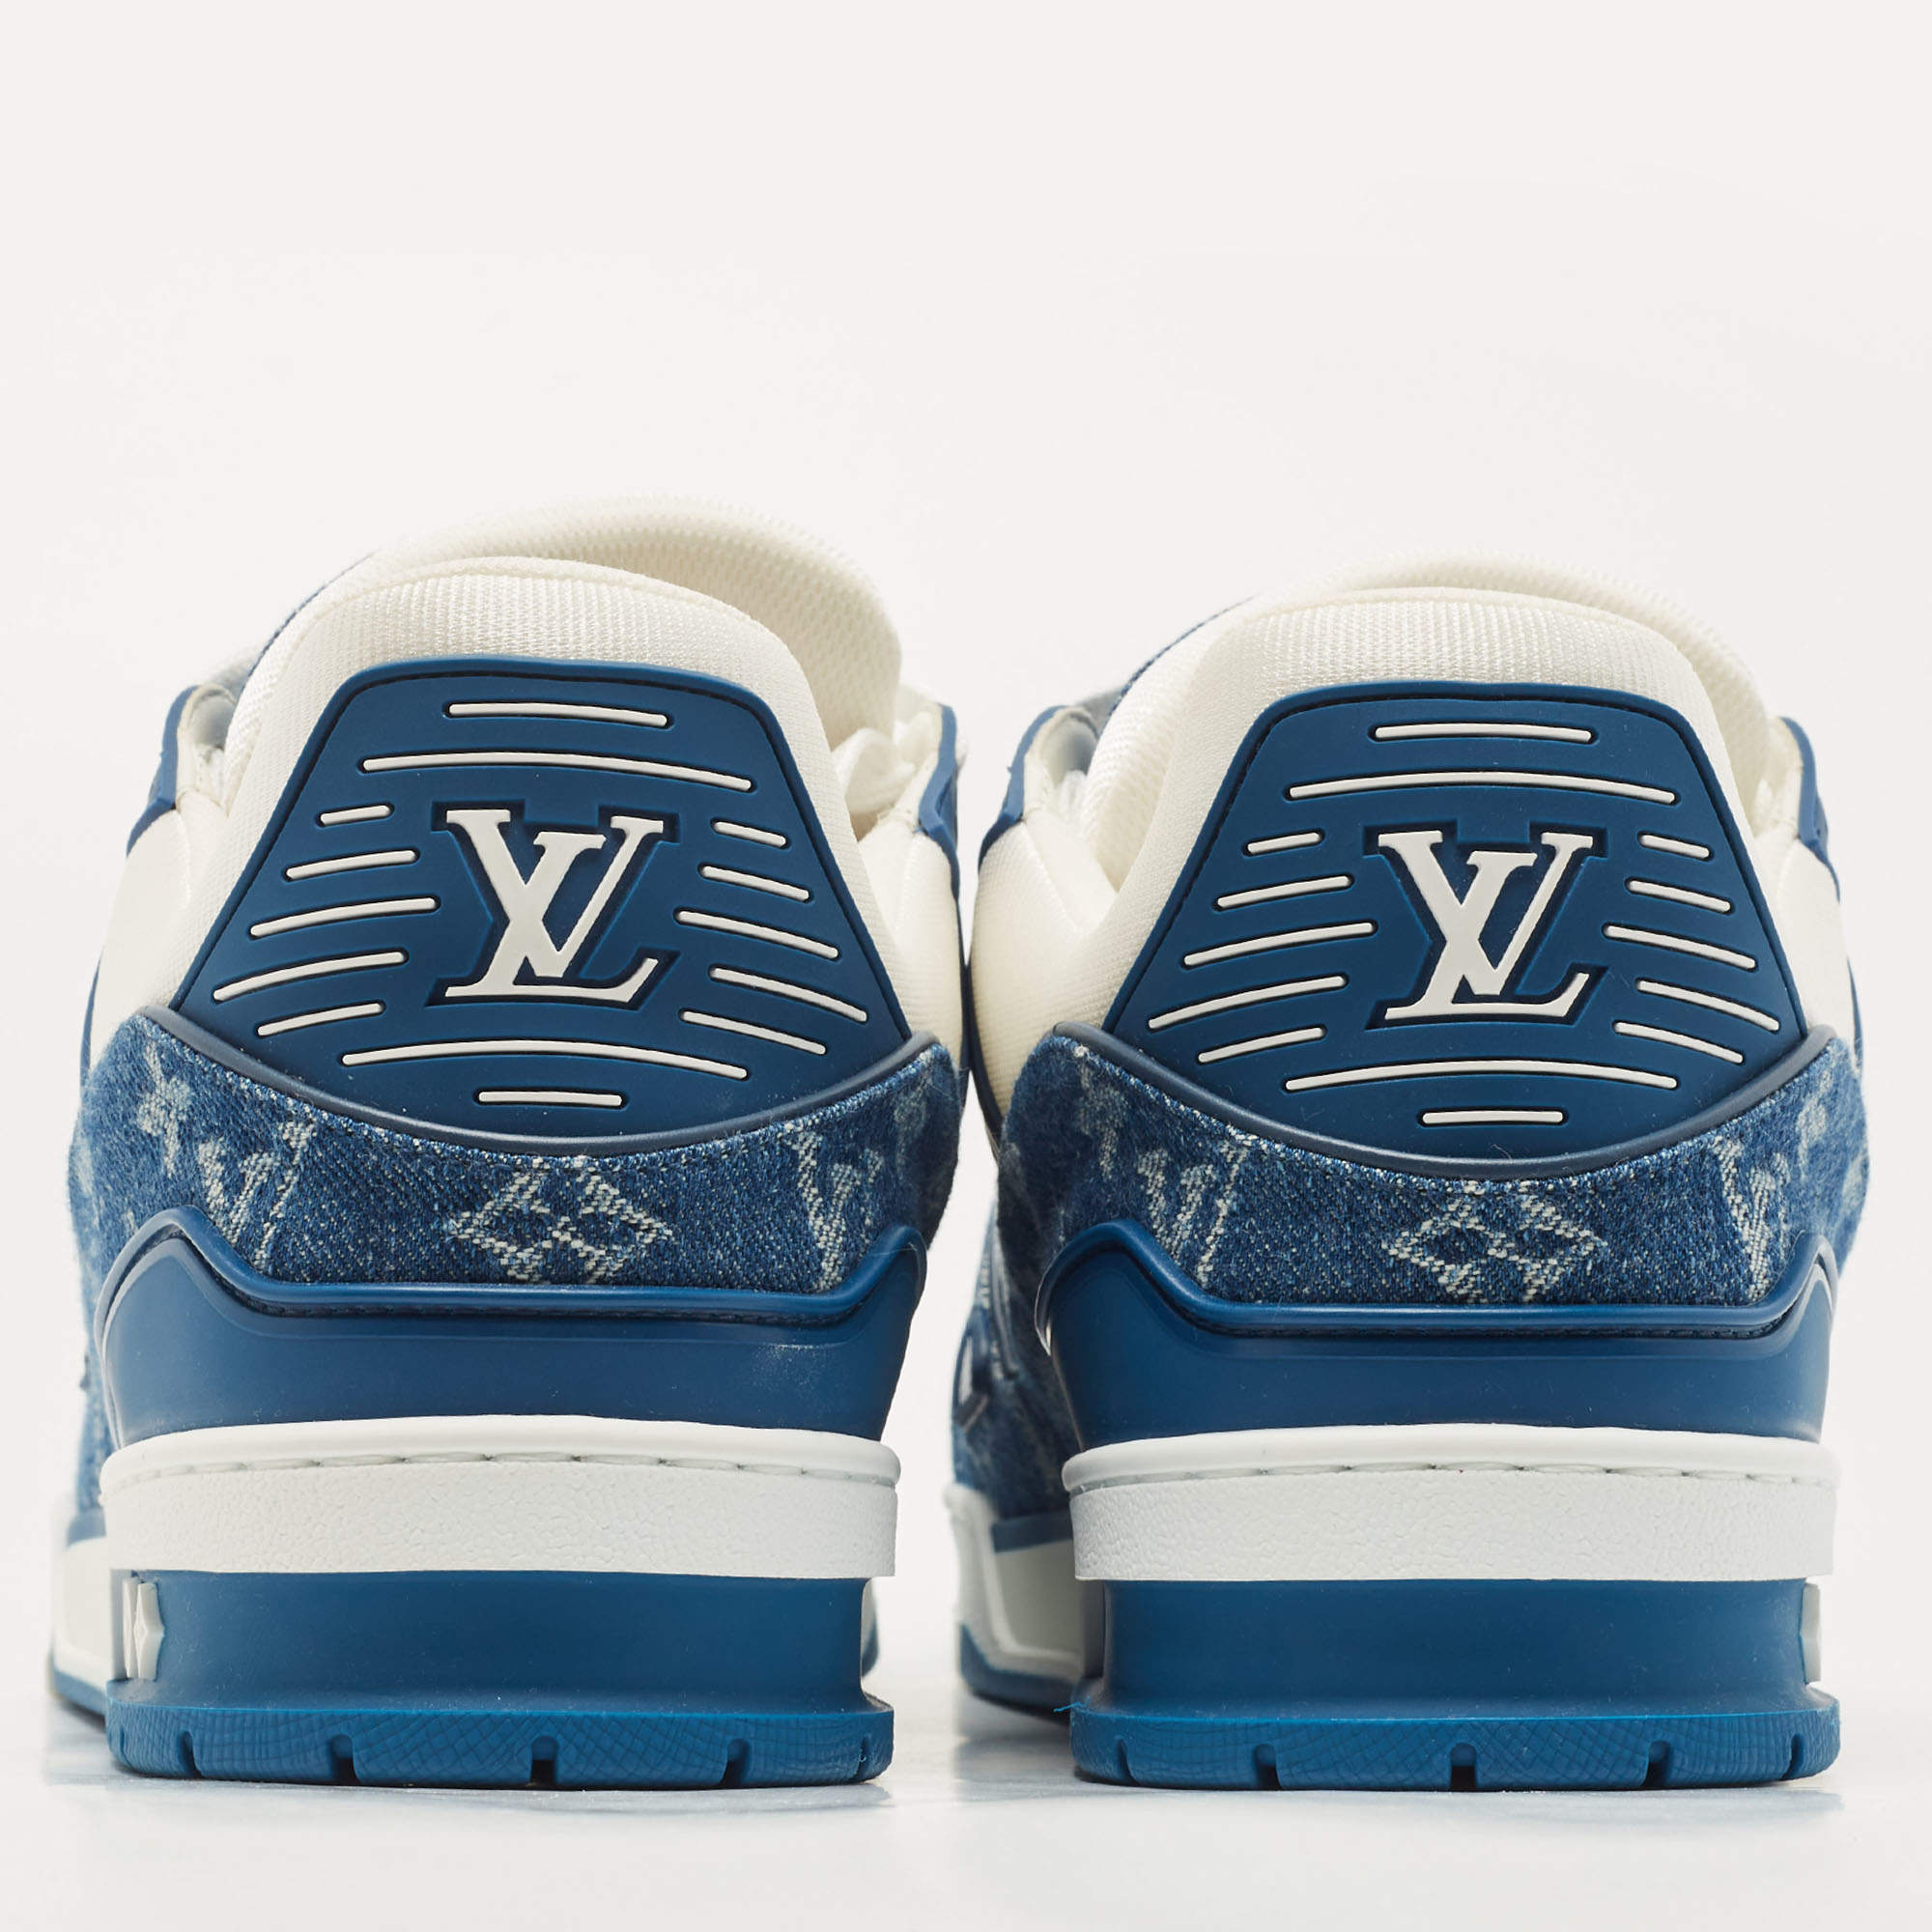 Louis Vuitton Blue/White Leather and Denim LV Trainer Sneakers Size 44  Louis Vuitton | The Luxury Closet